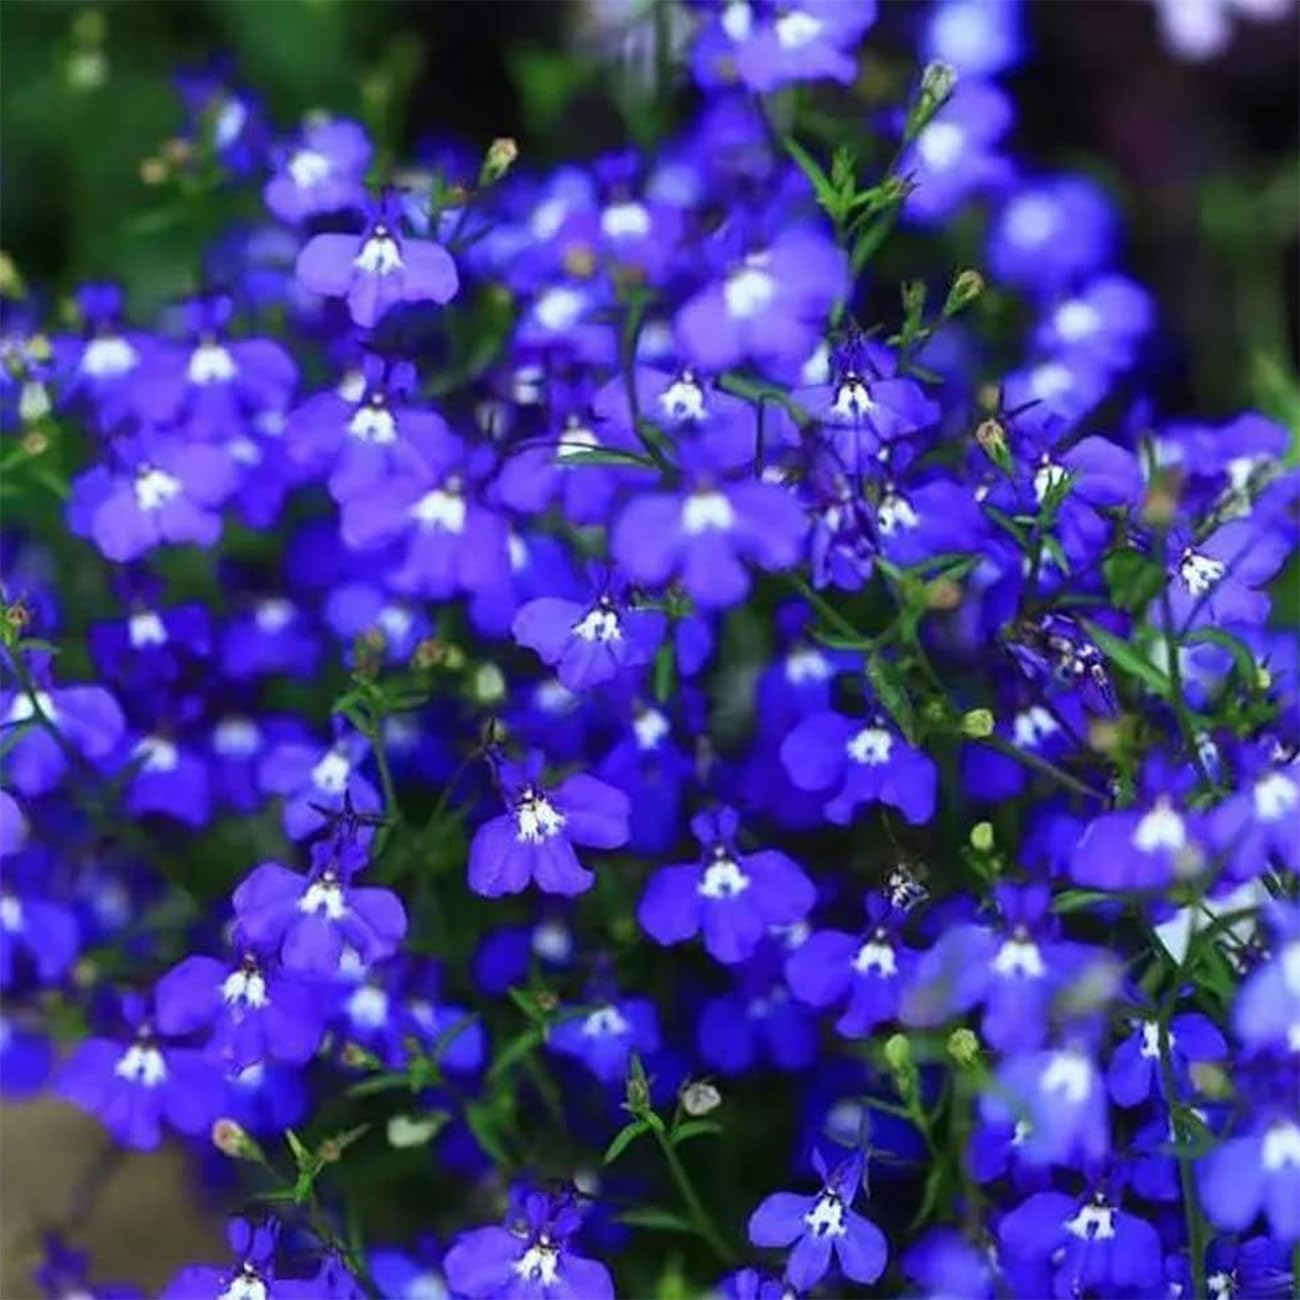 20000+ Magic Blue Creeping Thyme Seeds for Planting Ground Cover Plants Heirloom Flowers Perennial Thyme Non-GMO Thymus Serpyllum Seed